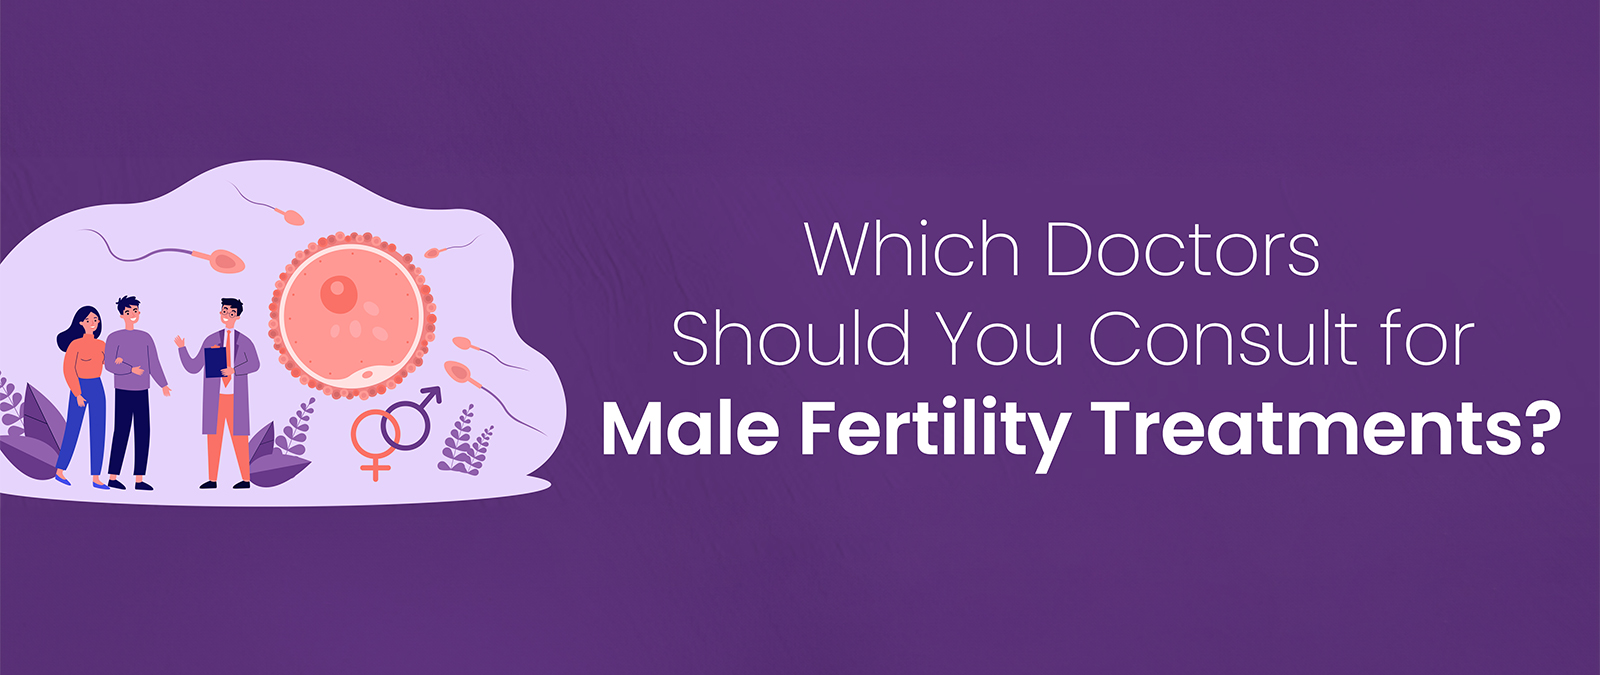 Which Doctors Should be Consulted for Male Fertility Treatments?